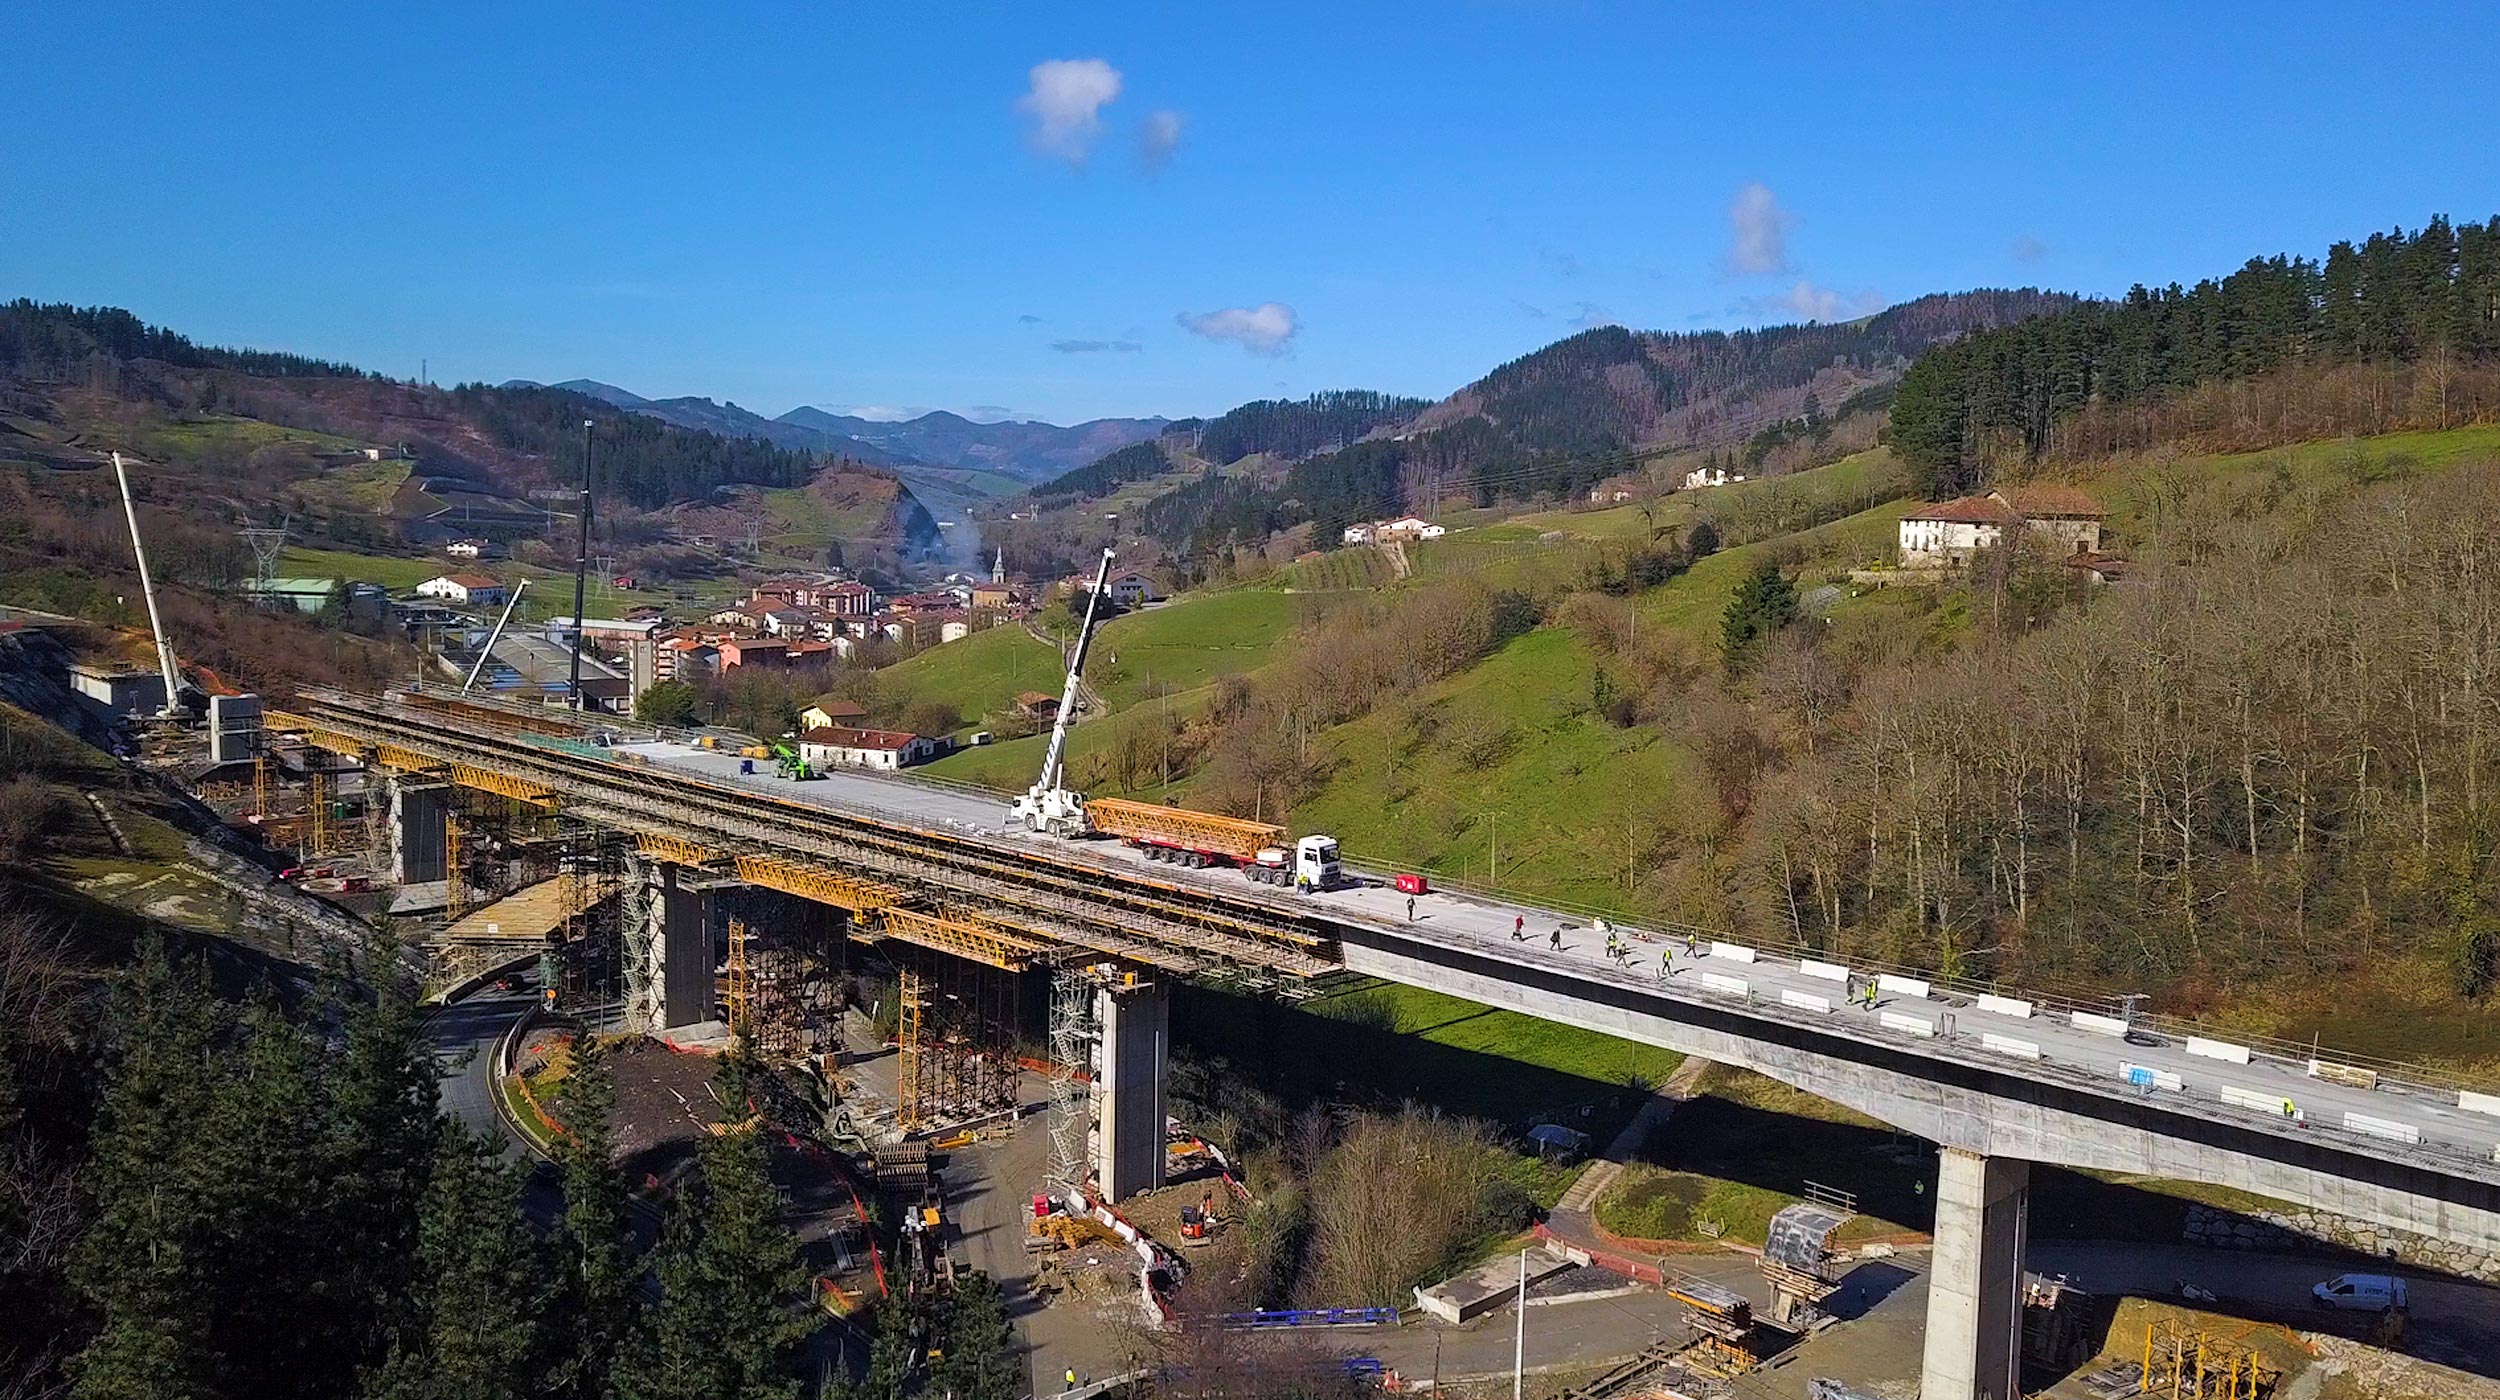 The Antzuola Viaduct is one of the many structures that make up the high-speed train corridor in Basque Country, Spain.